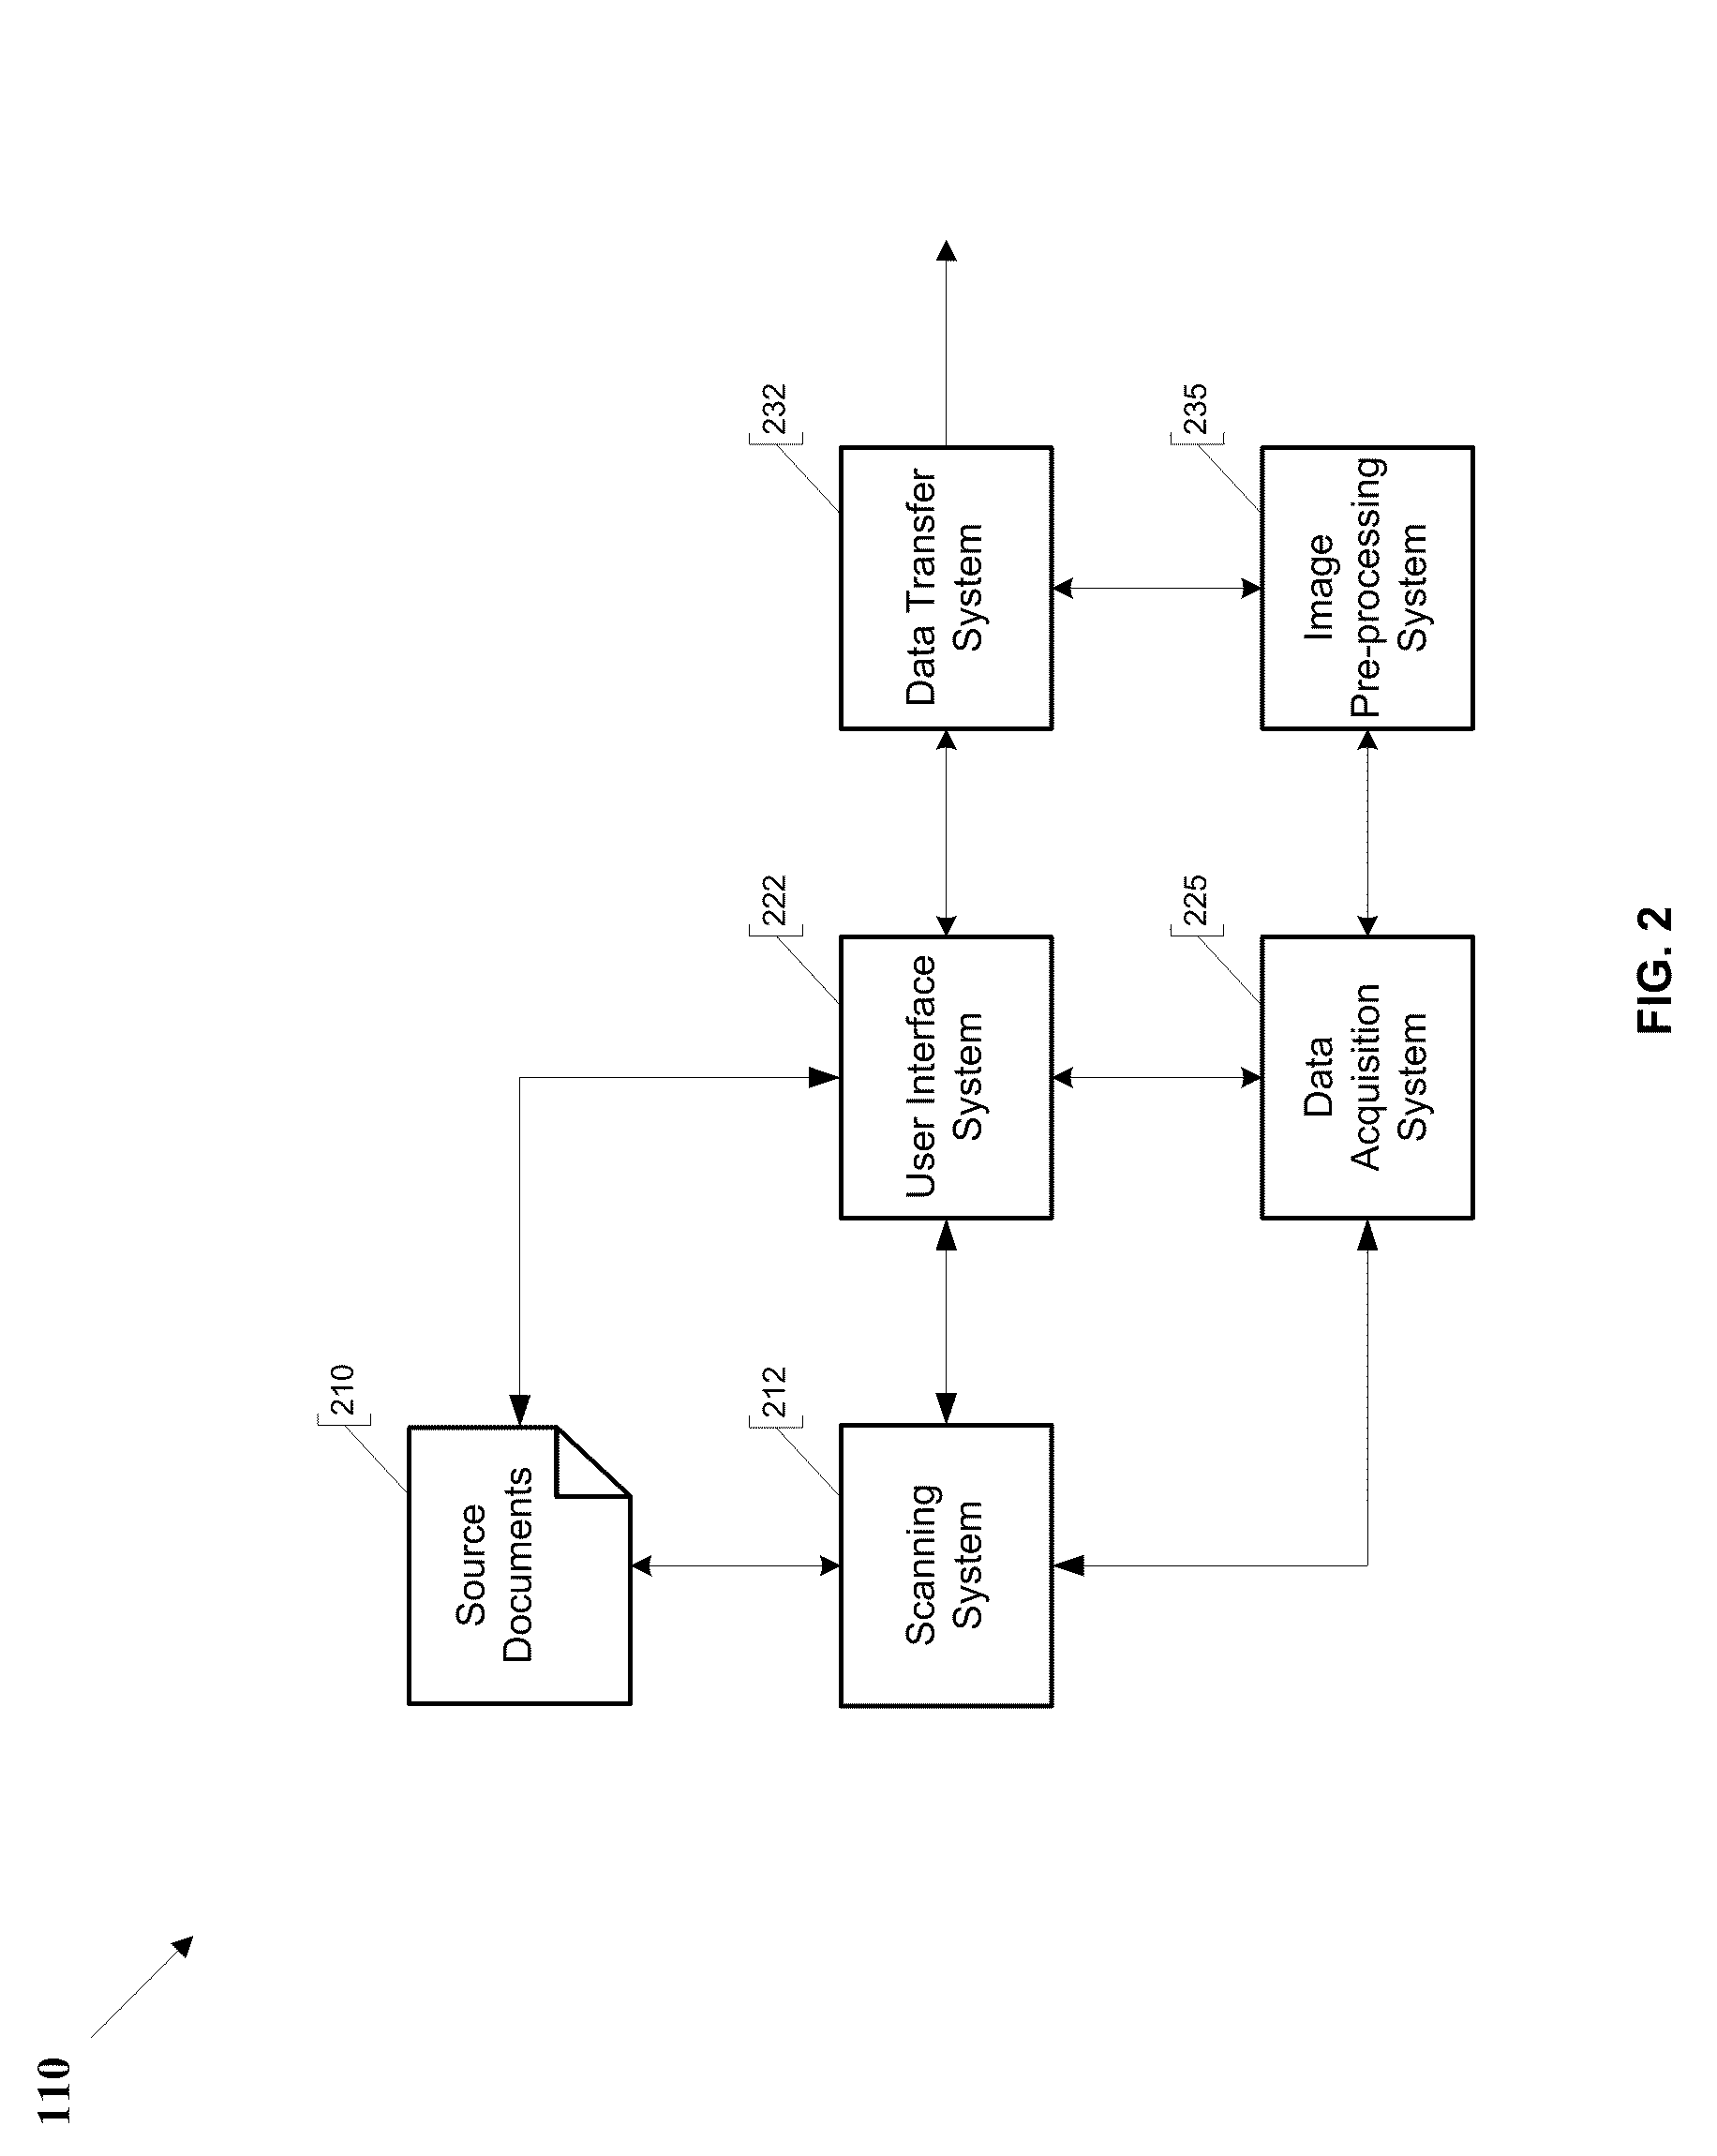 Systems and methods for automatically processing electronic documents using multiple image transformation algorithms